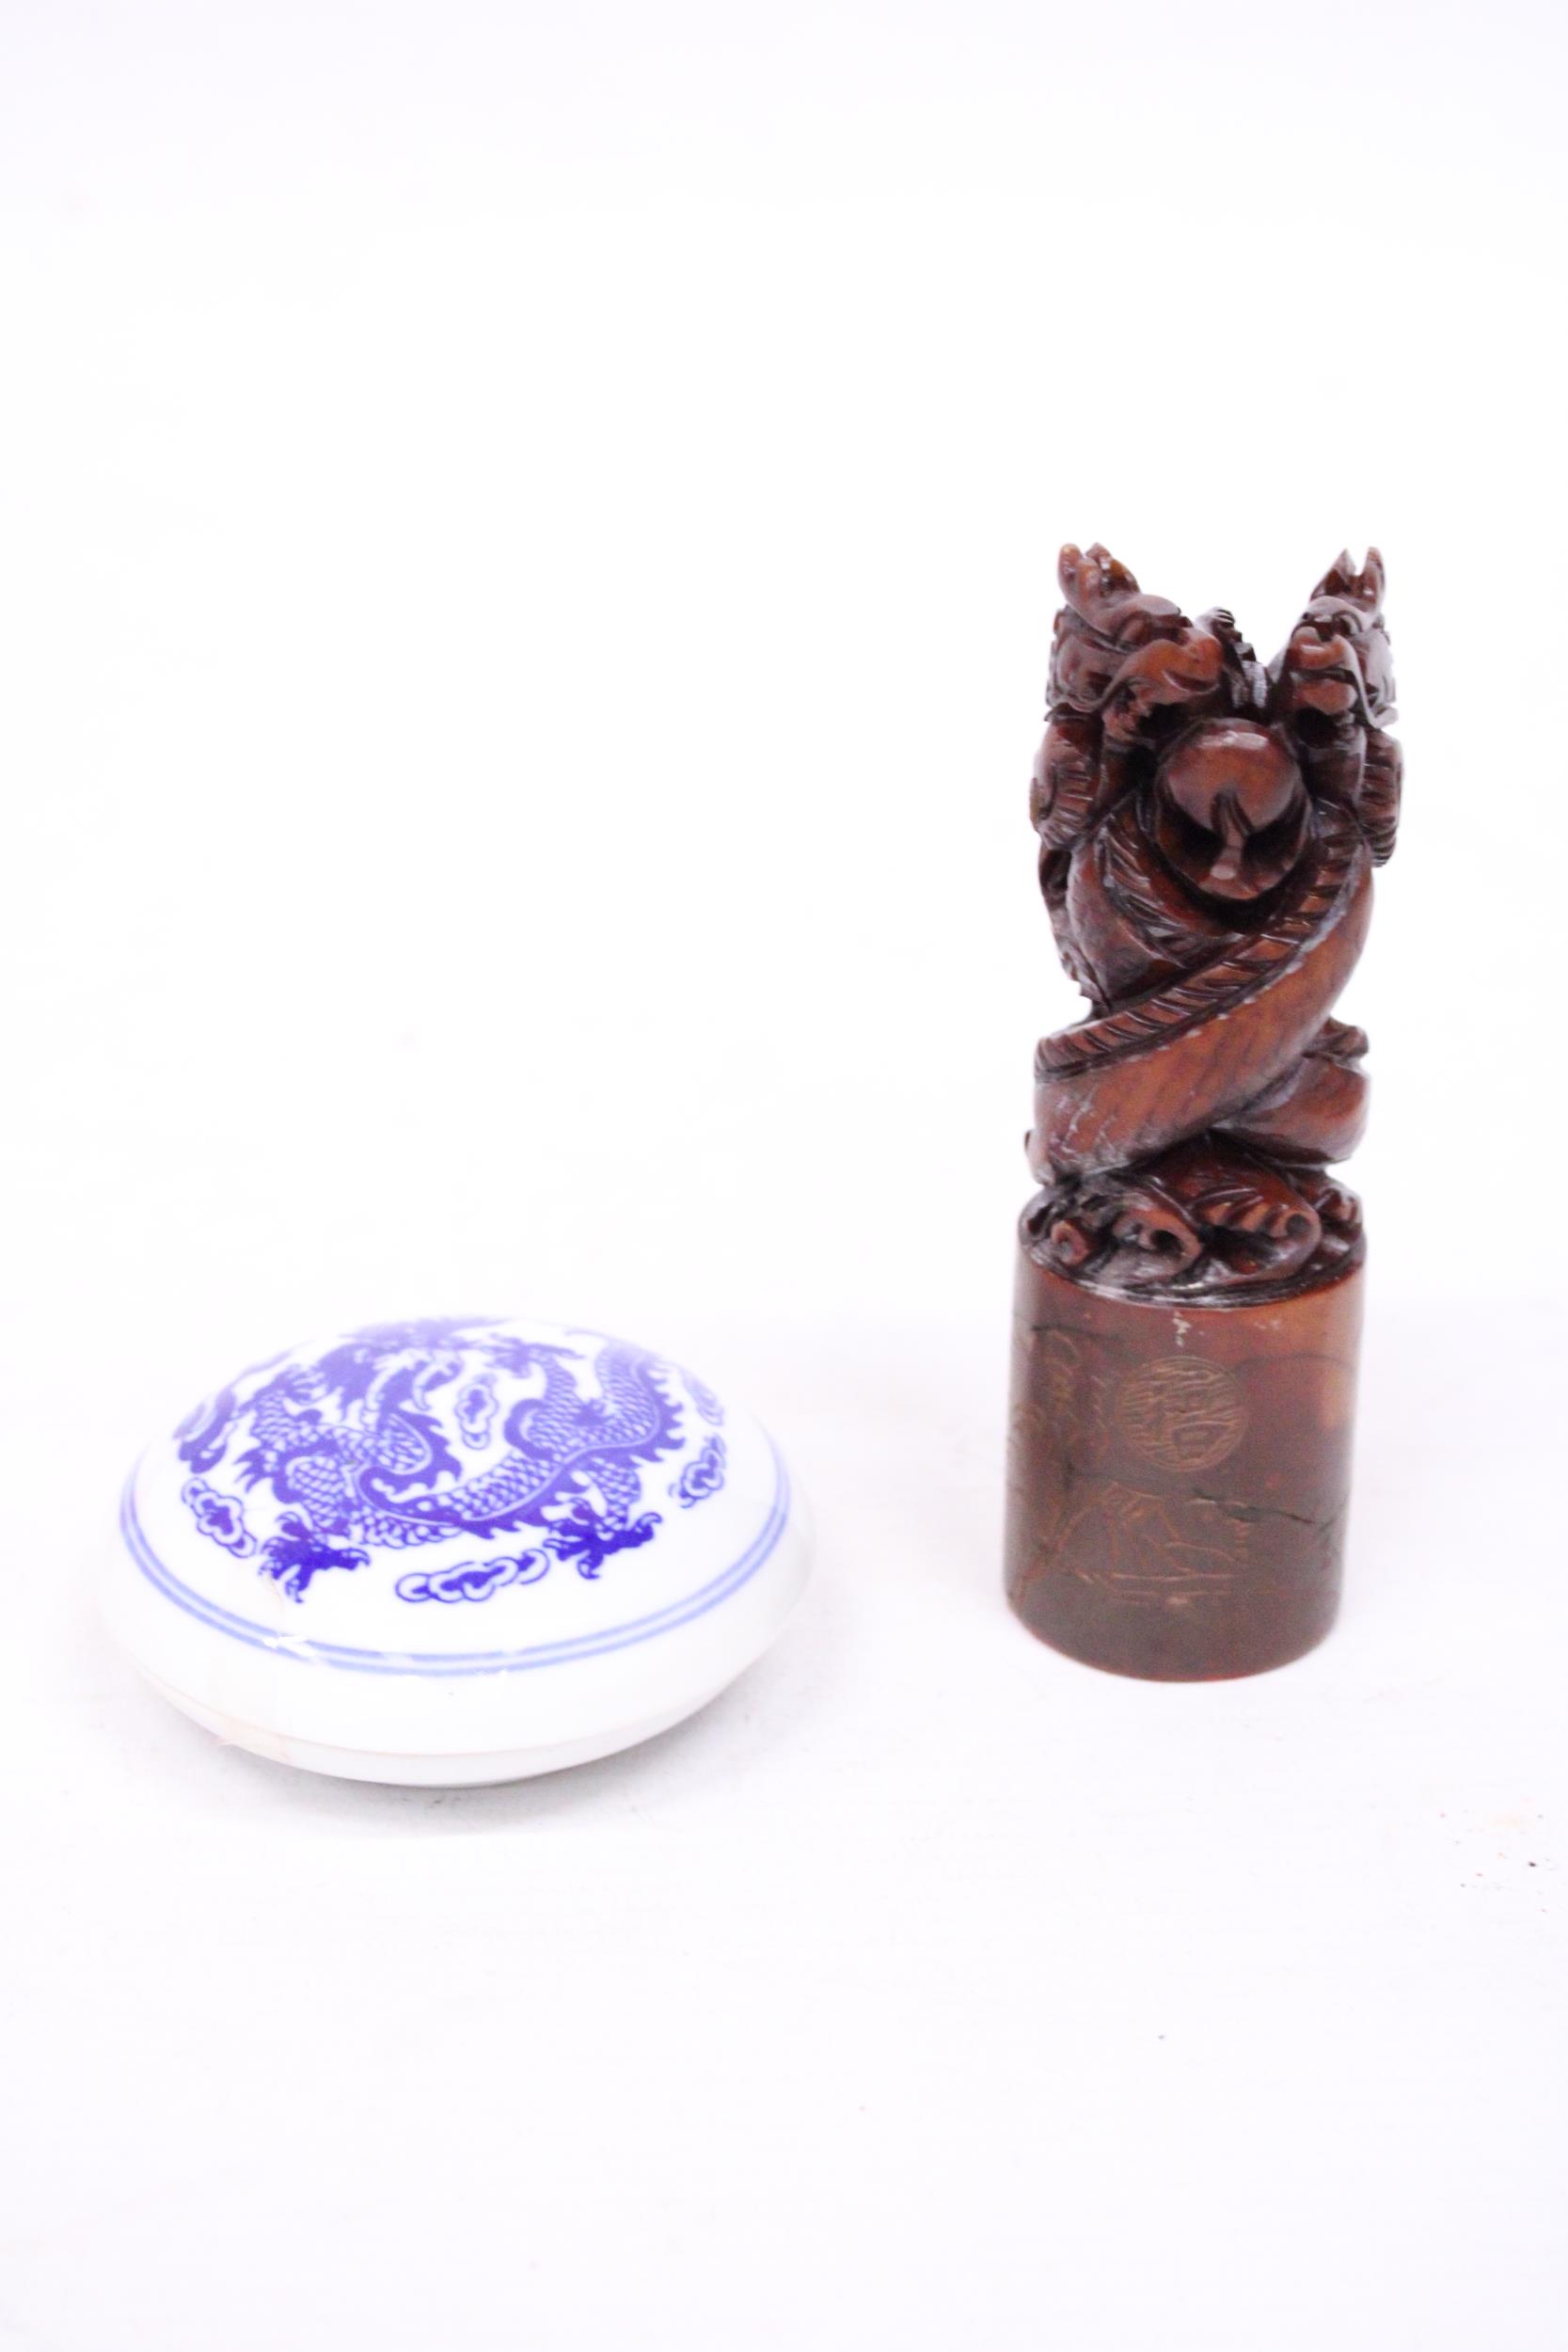 A VINTAGE CHINESE MARBLE STAMP BOX SET - Image 2 of 7